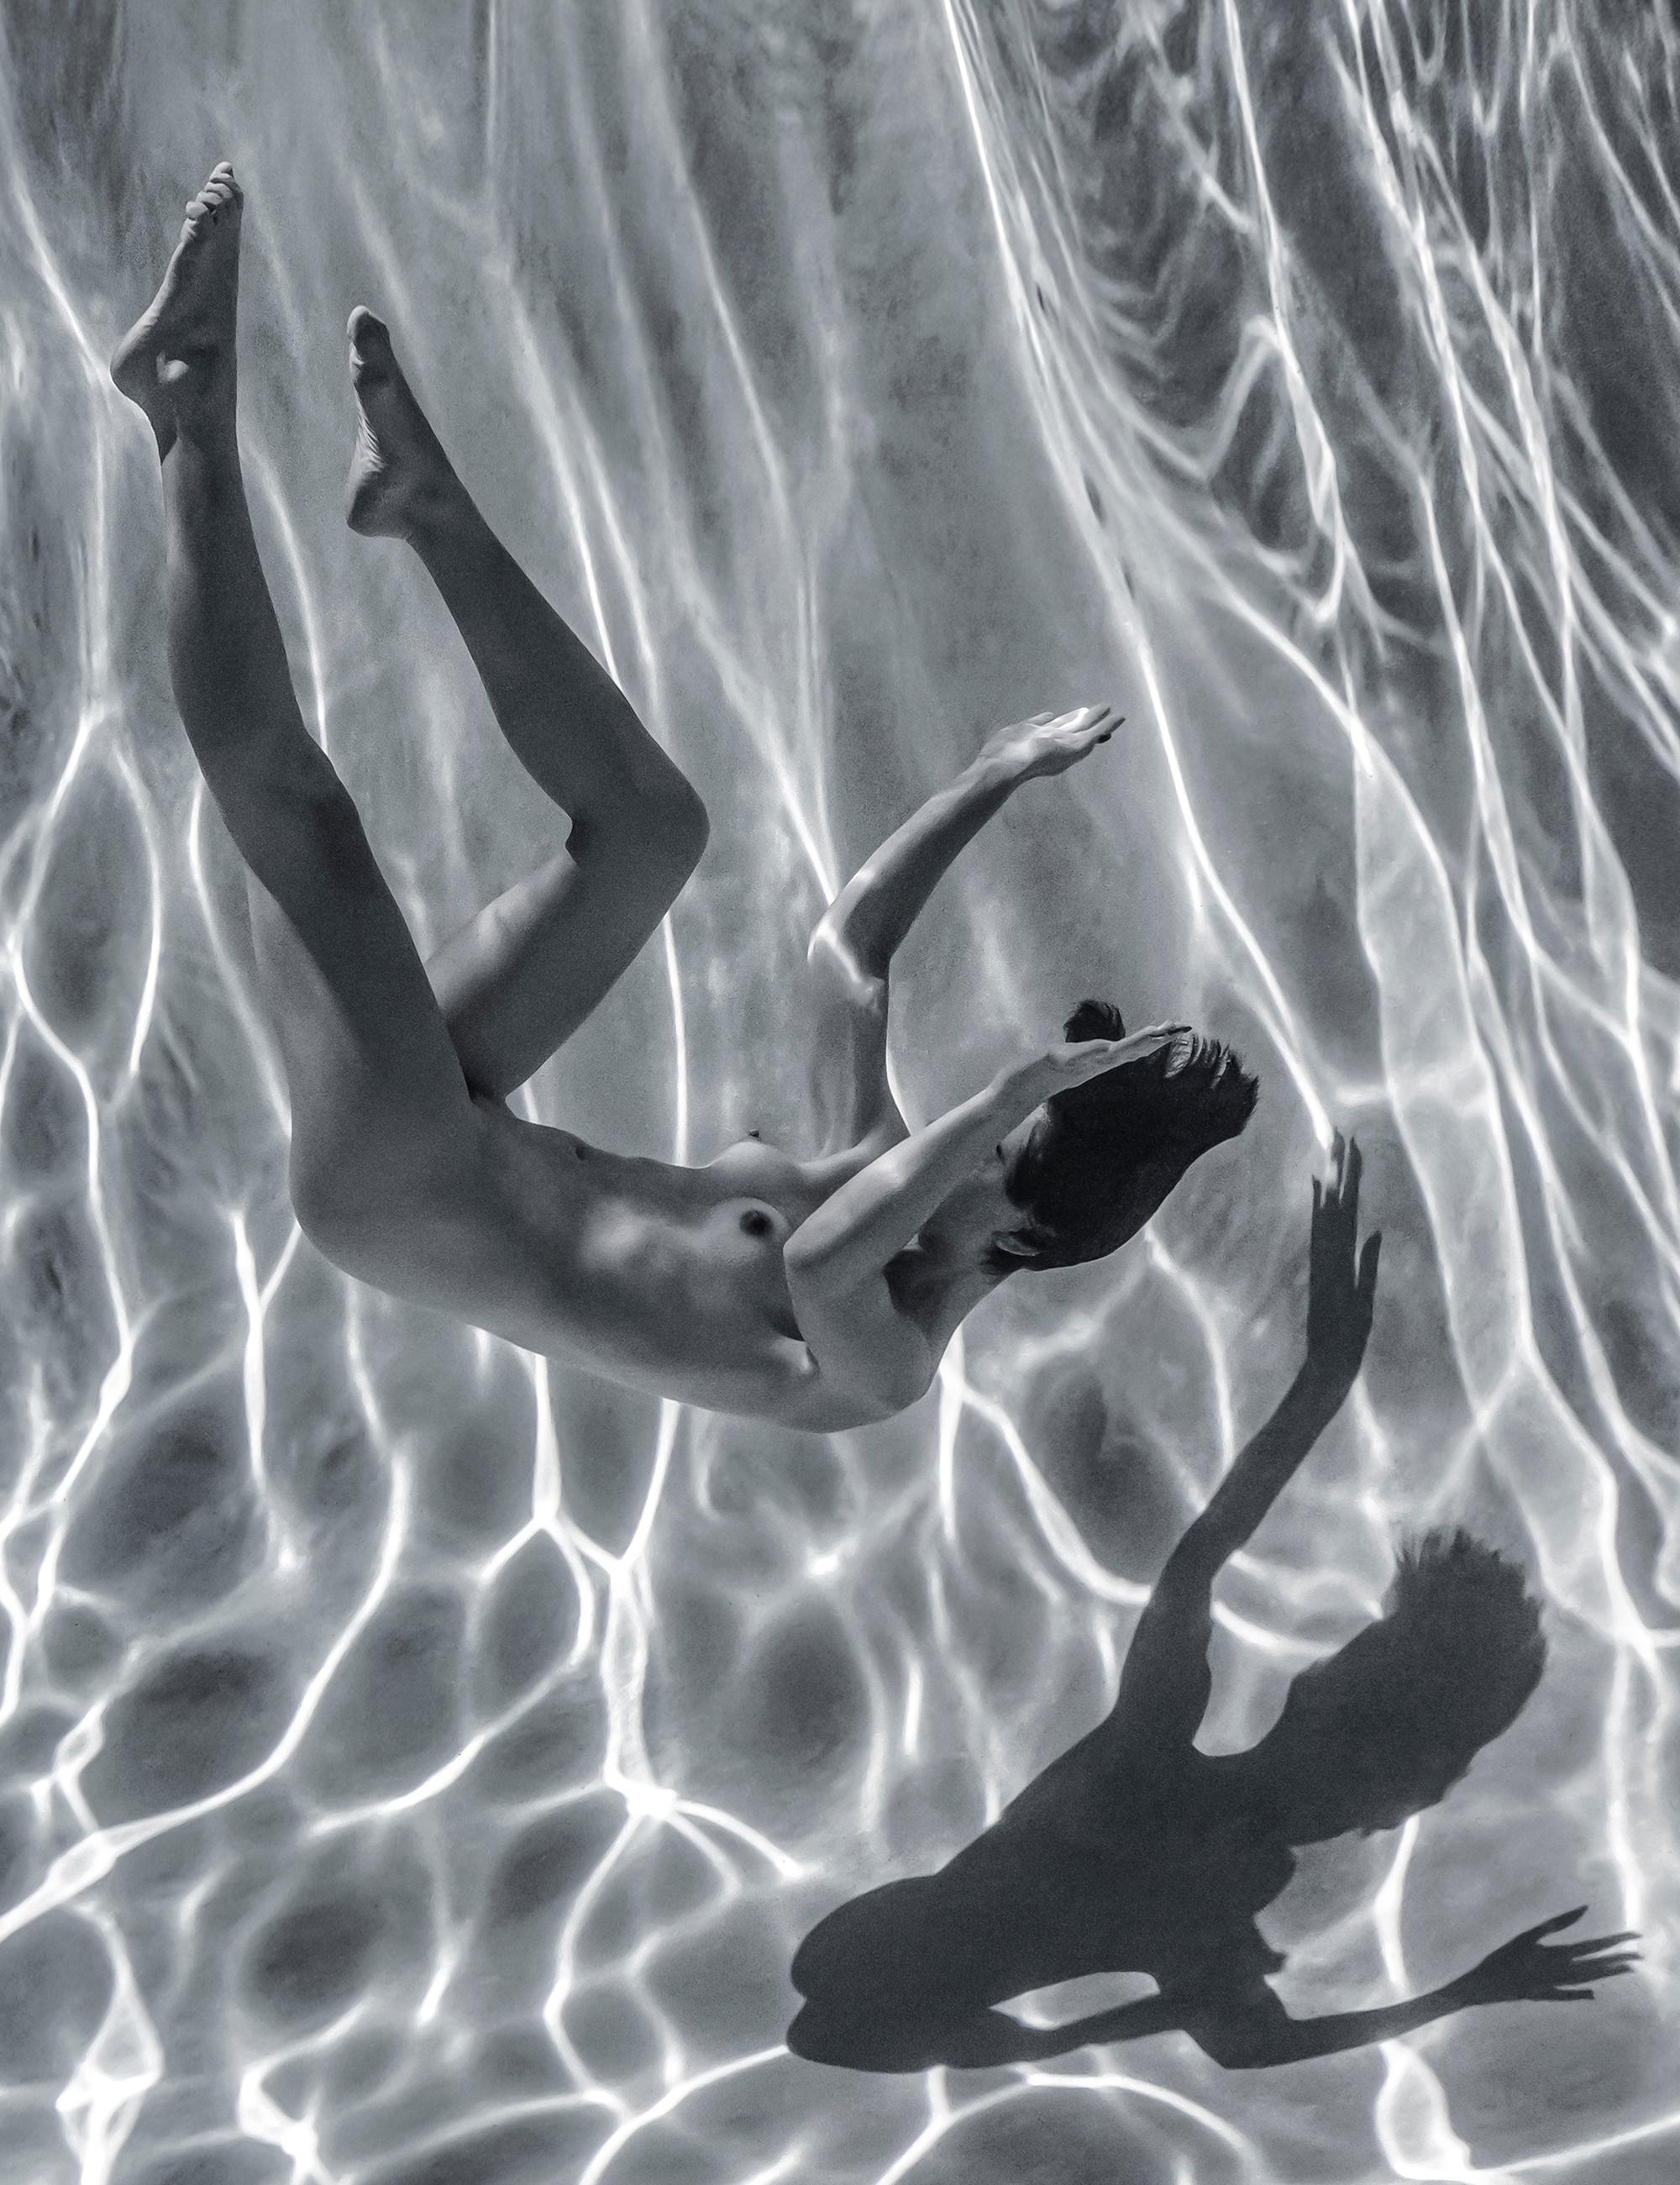 Underwater black and white photograph of a naked young woman in a pool. 

Original digital print on aluminum plate with black backboard - signed by the artist.
The artwork needs no additional framing: it can be hung and it can stand on a surface.